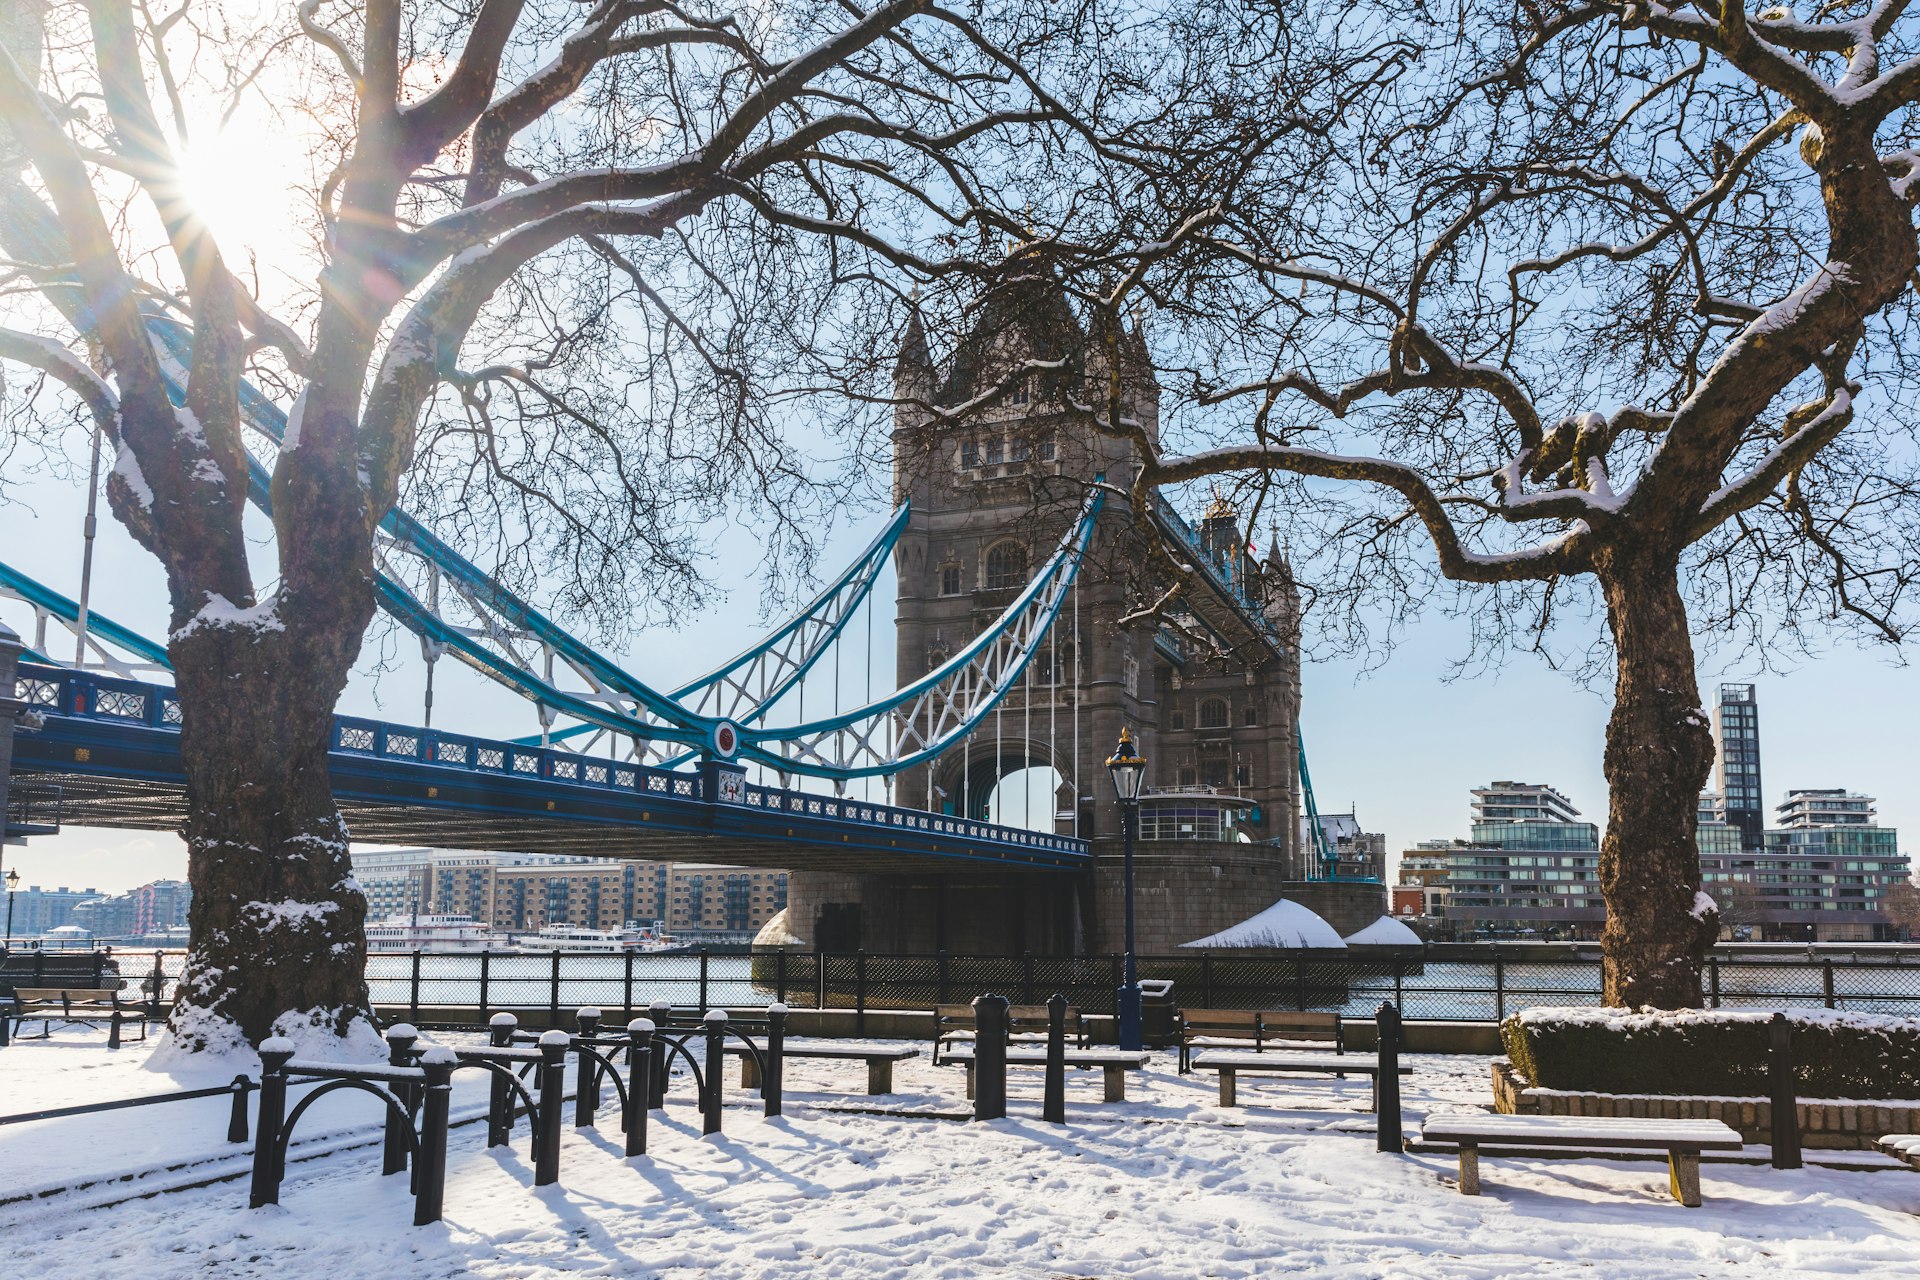 Tower Bridge and trees in London with snow